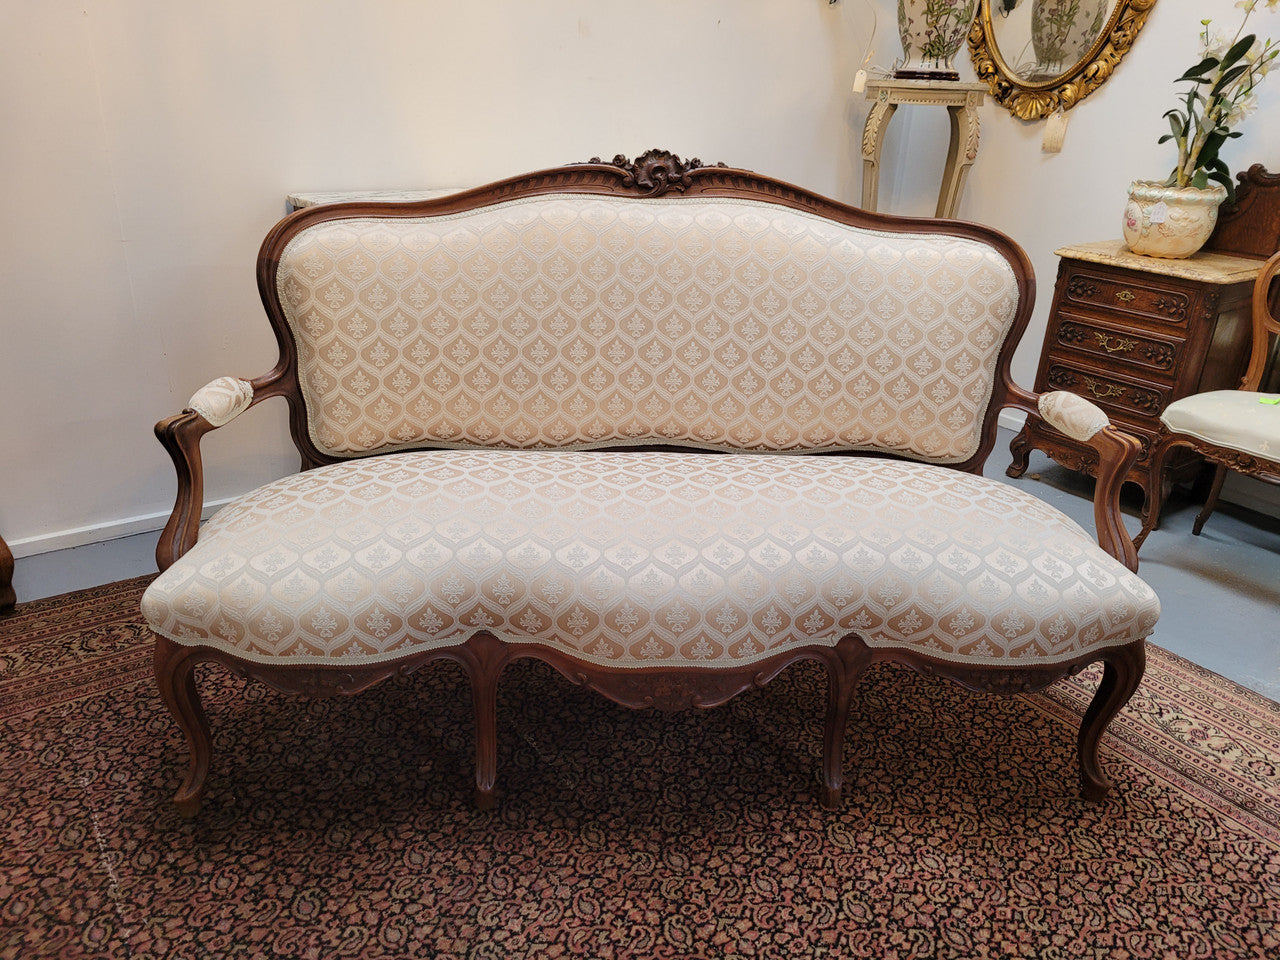 A late 19th Century French Walnut Louis XV style settee with a serpentine front. This settee upholstery is like new and is in very good condition.